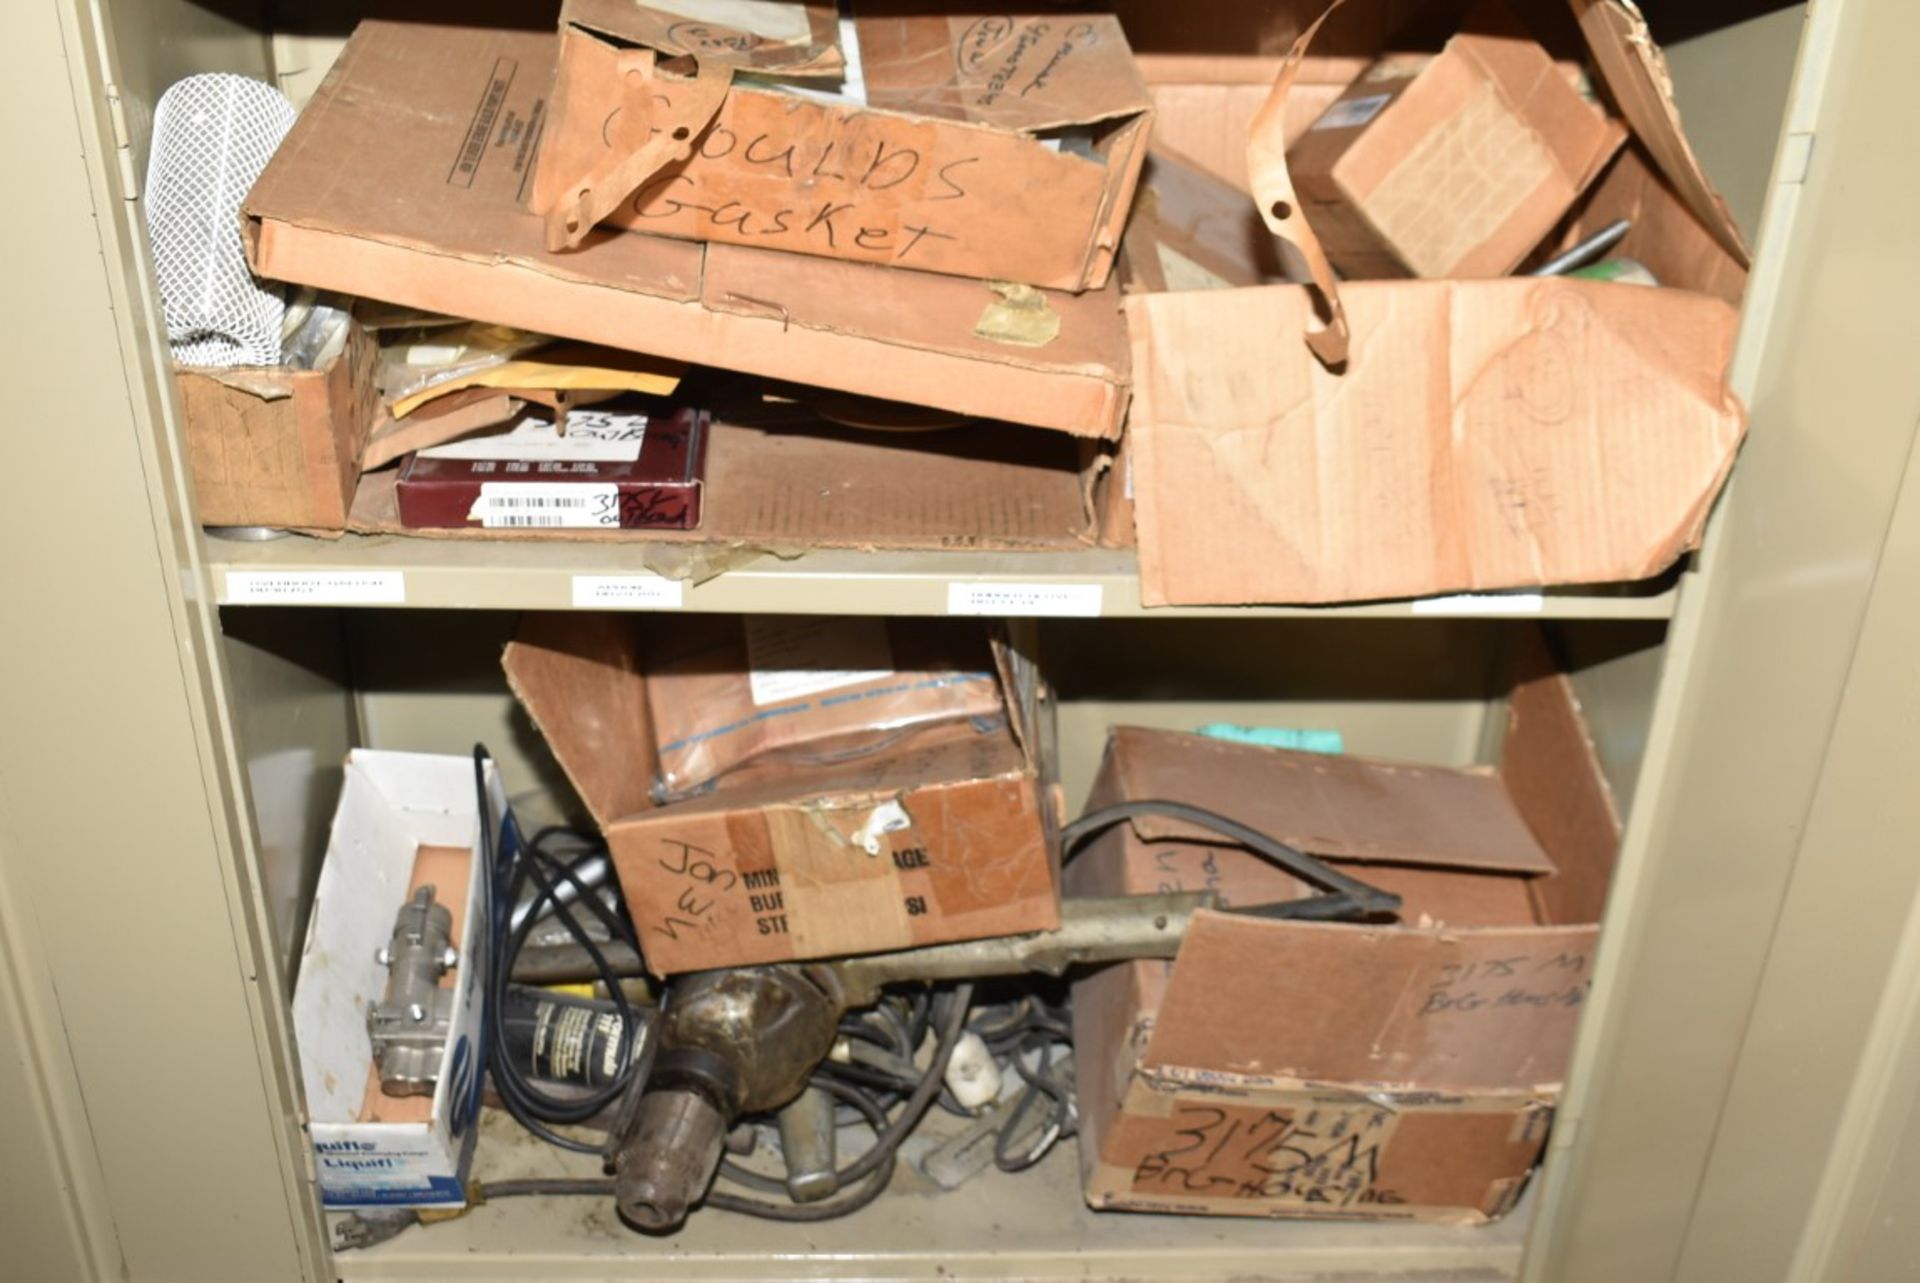 LOT/ (2) STORAGE CABINETS WITH CONTENTS - INCLUDING SPARE PARTS & SHOP SUPPLIES - Image 8 of 9